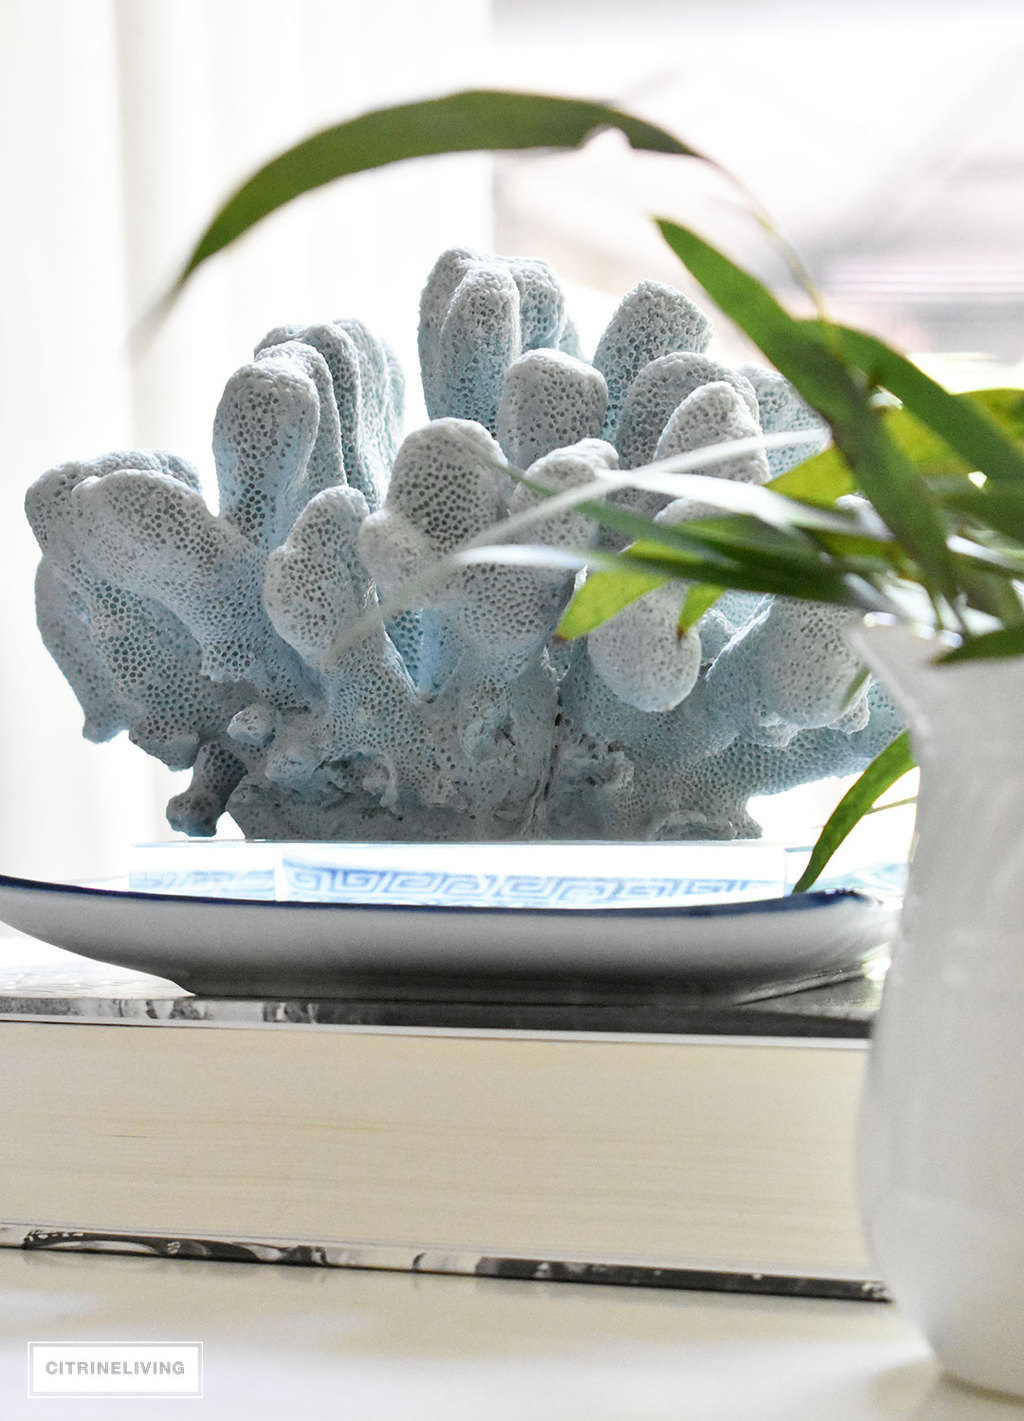 Natural curiosities like coral, agate, and seashells are perfect for Summer decorating